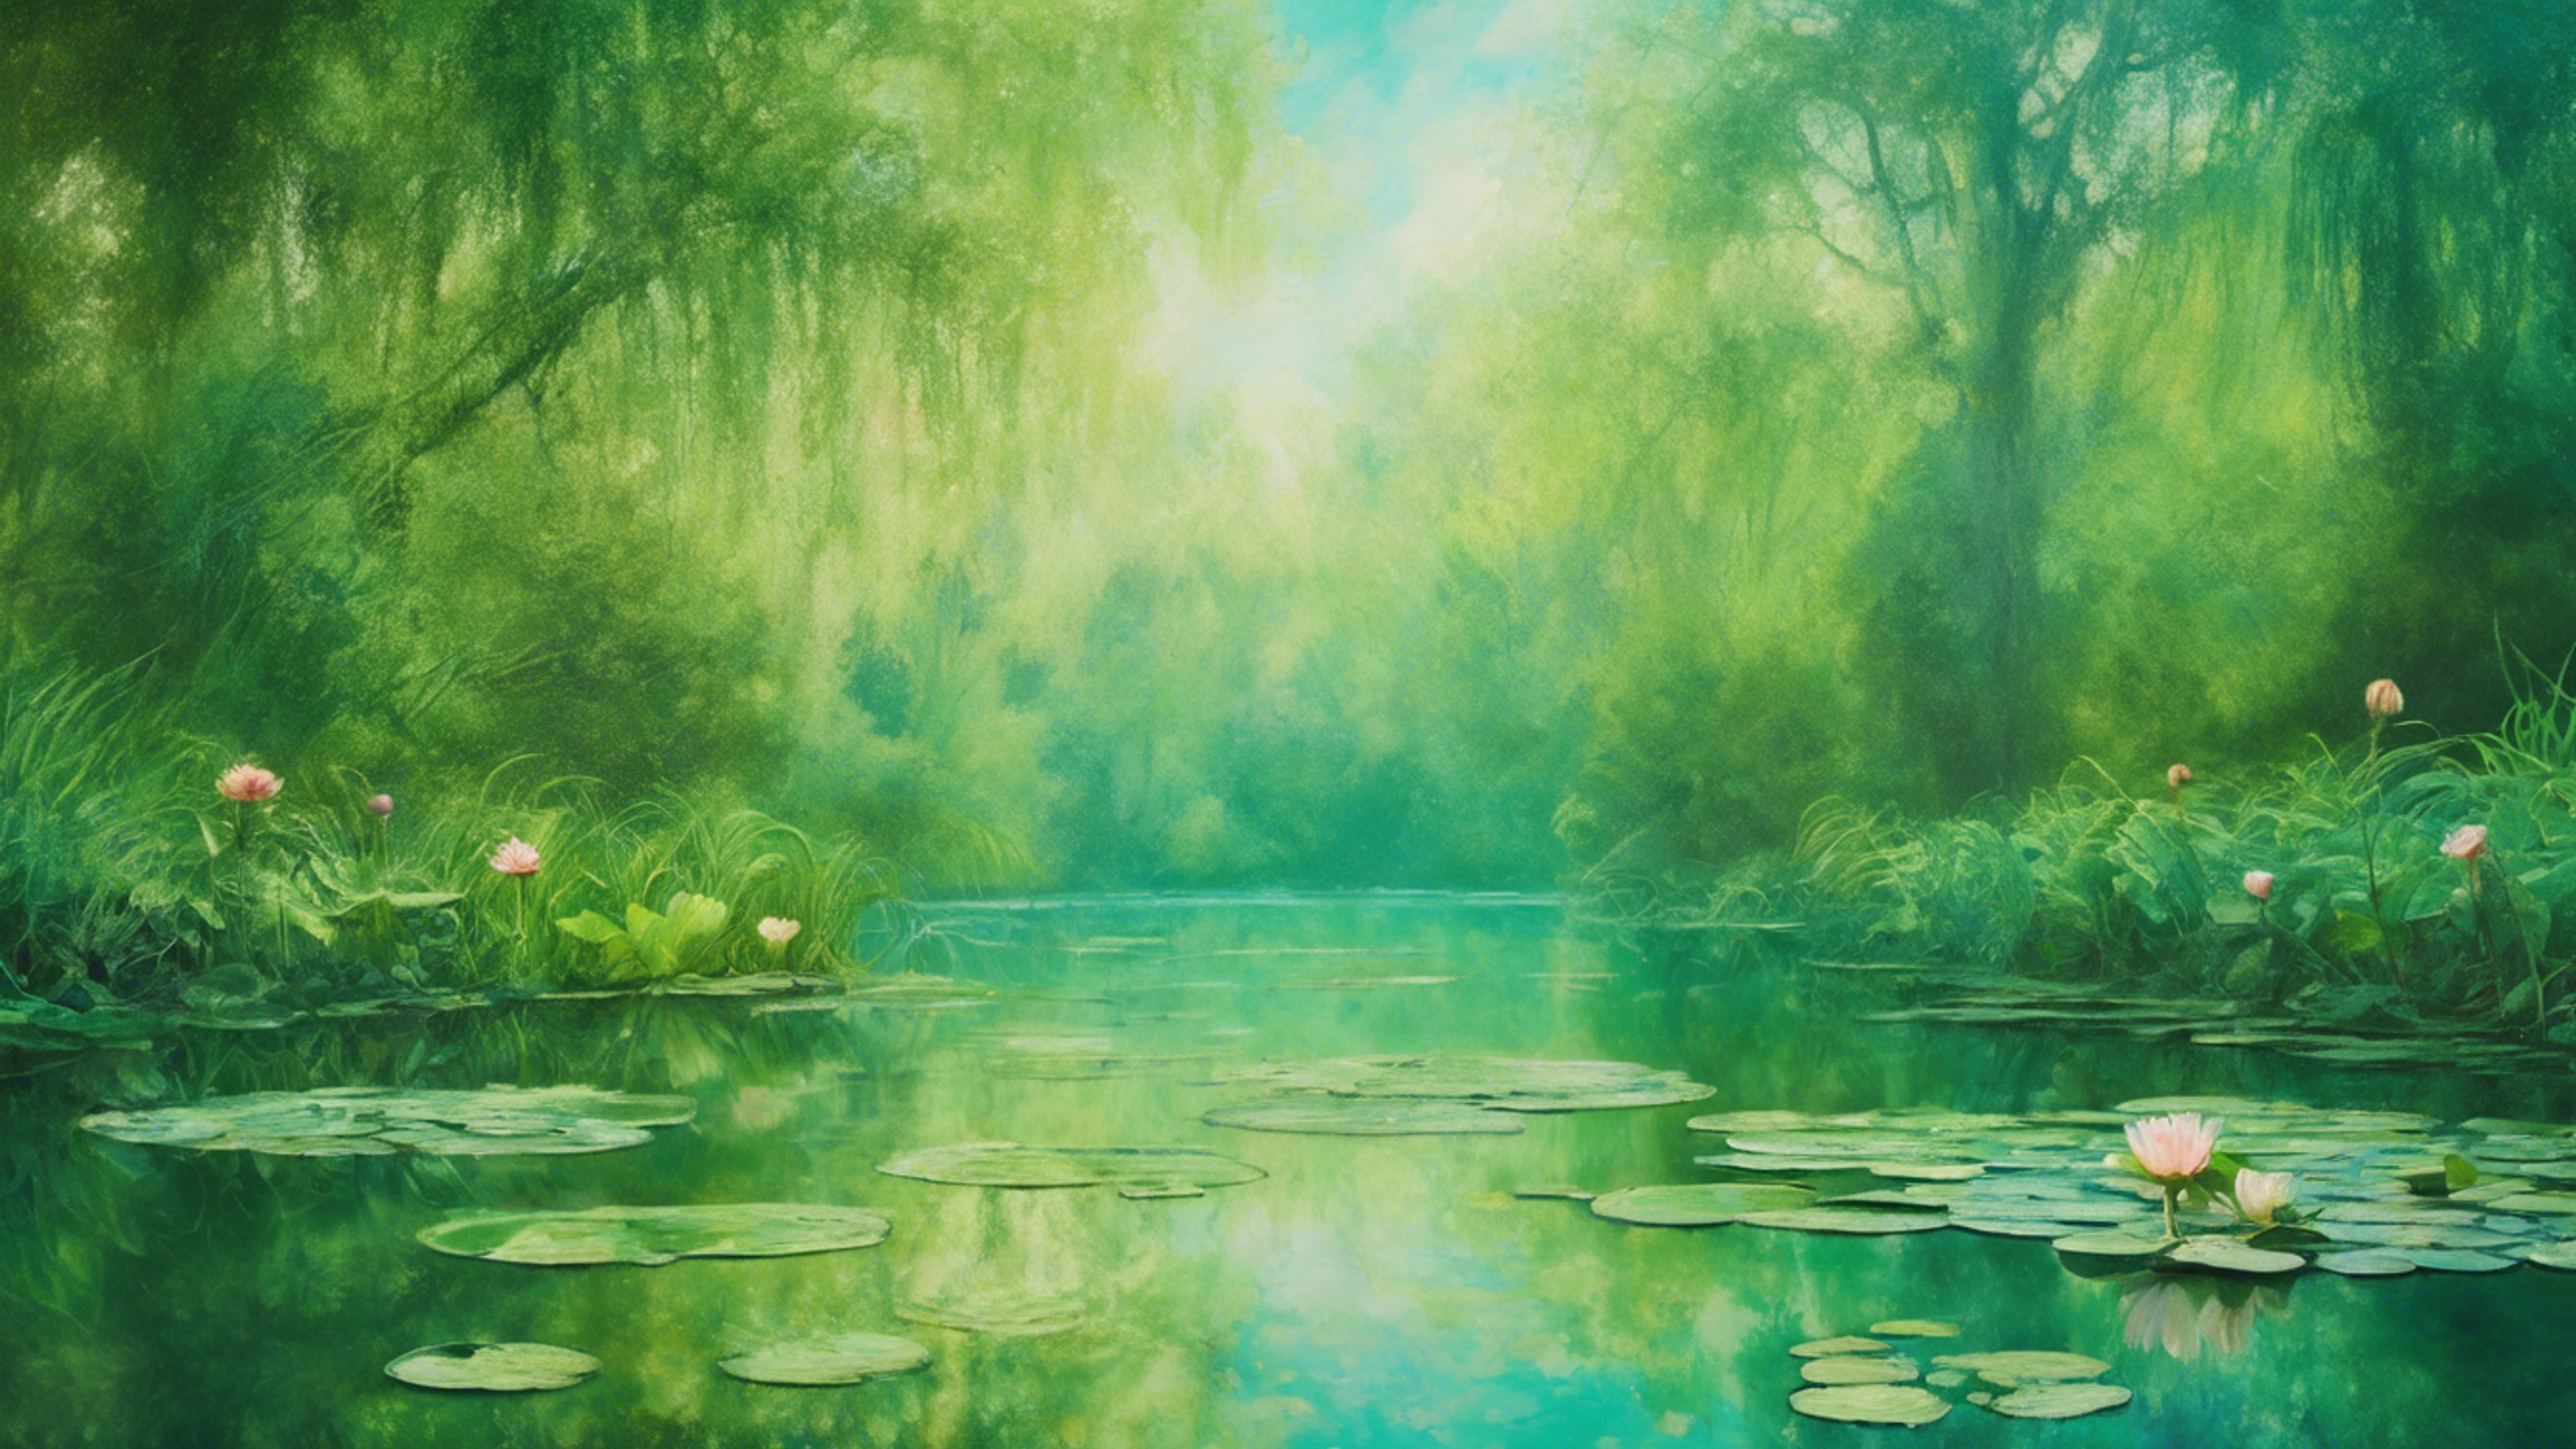 A landscape painting inspired by Monet's Water Lilies, with cool green hues. Tapet[9f0abb477fe746e08ba1]